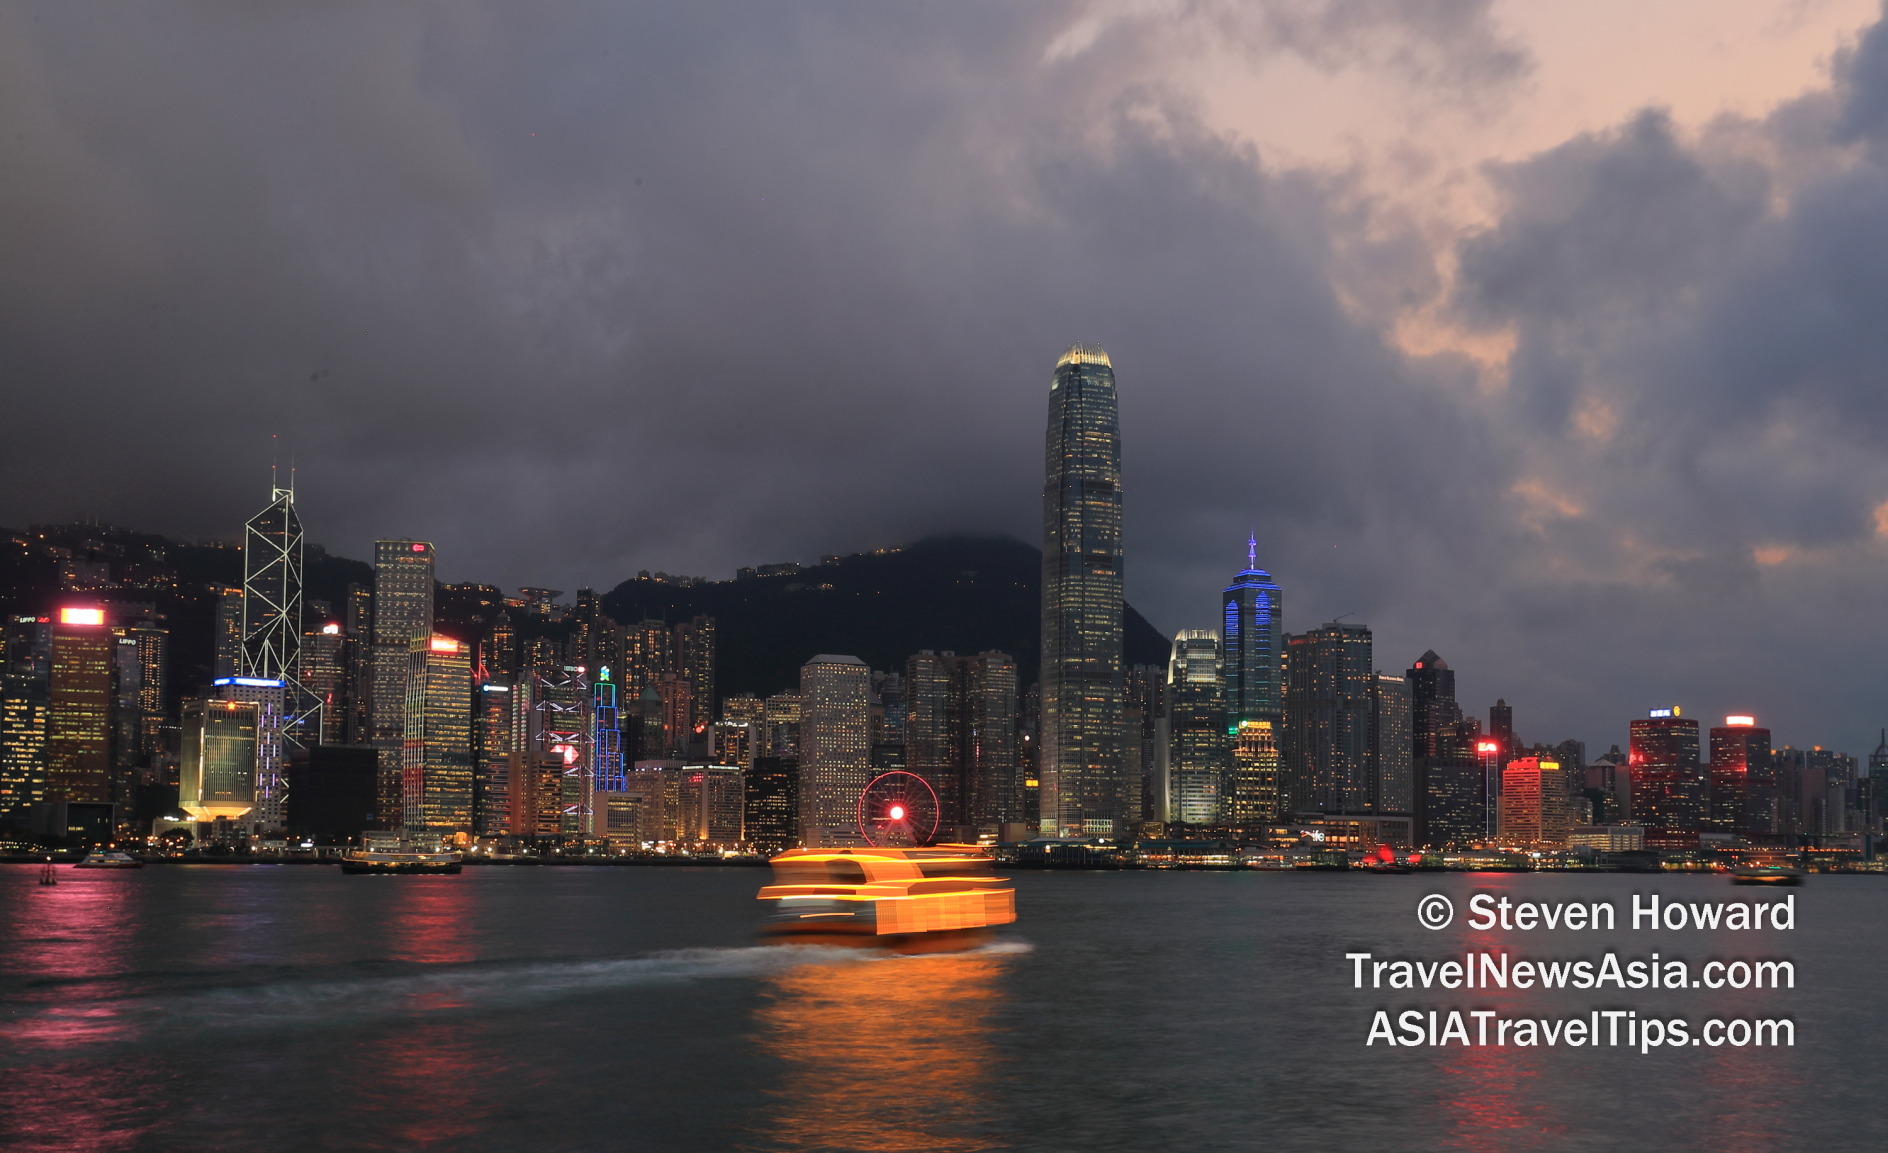 Victoria Harbour, Hong Kong. Picture by Steven Howard of TravelNewsAsia.com Click to enlarge.